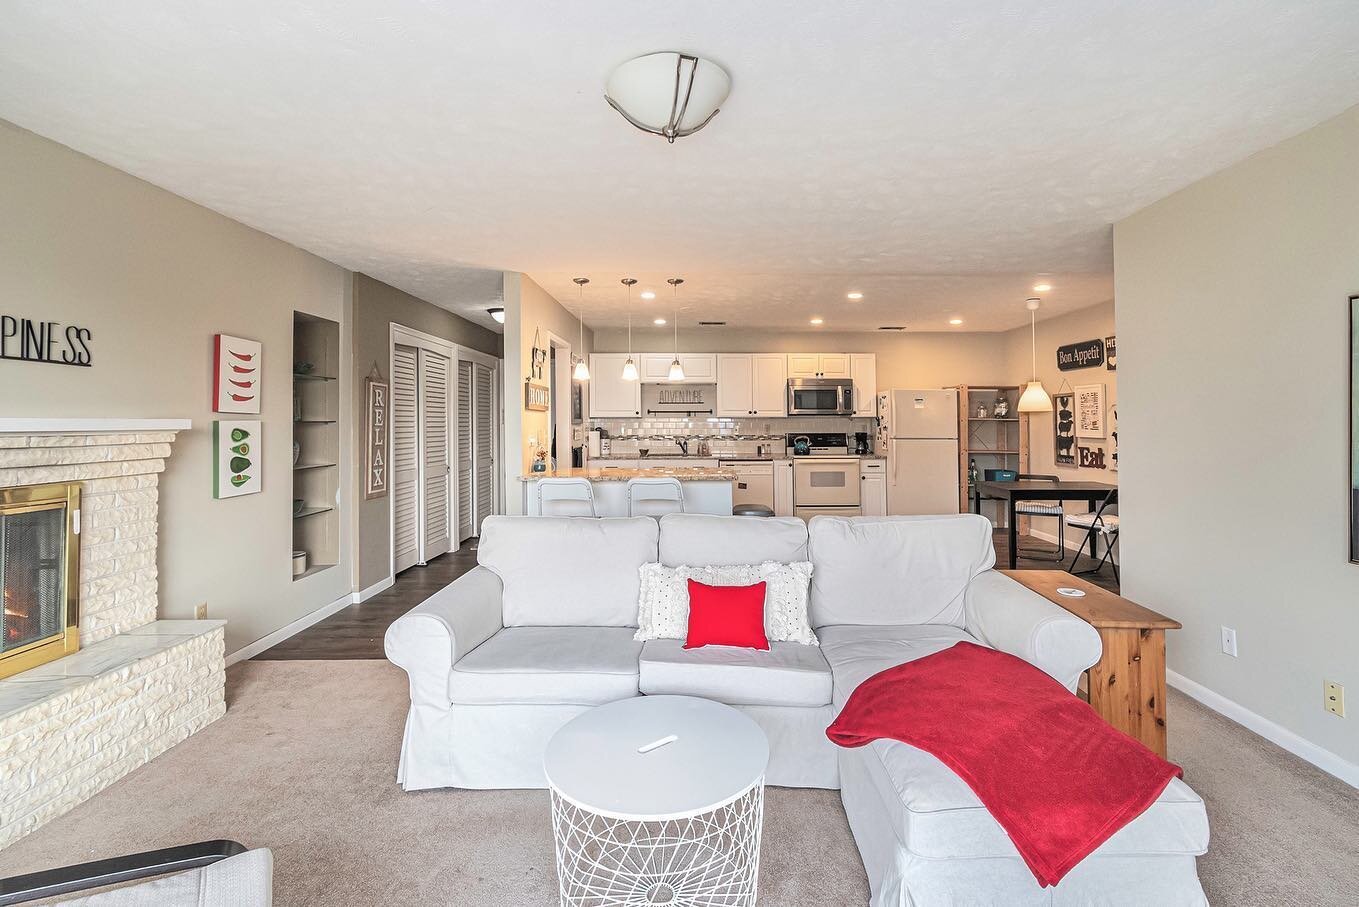 500 S 37 St #204 
Omaha, NE 68105

Experience urban living at its finest with this stunning condo located steps away from the vibrant Blackstone District. Recently renovated with a modern touch, this unit boasts white cabinetry, high-end LVP flooring